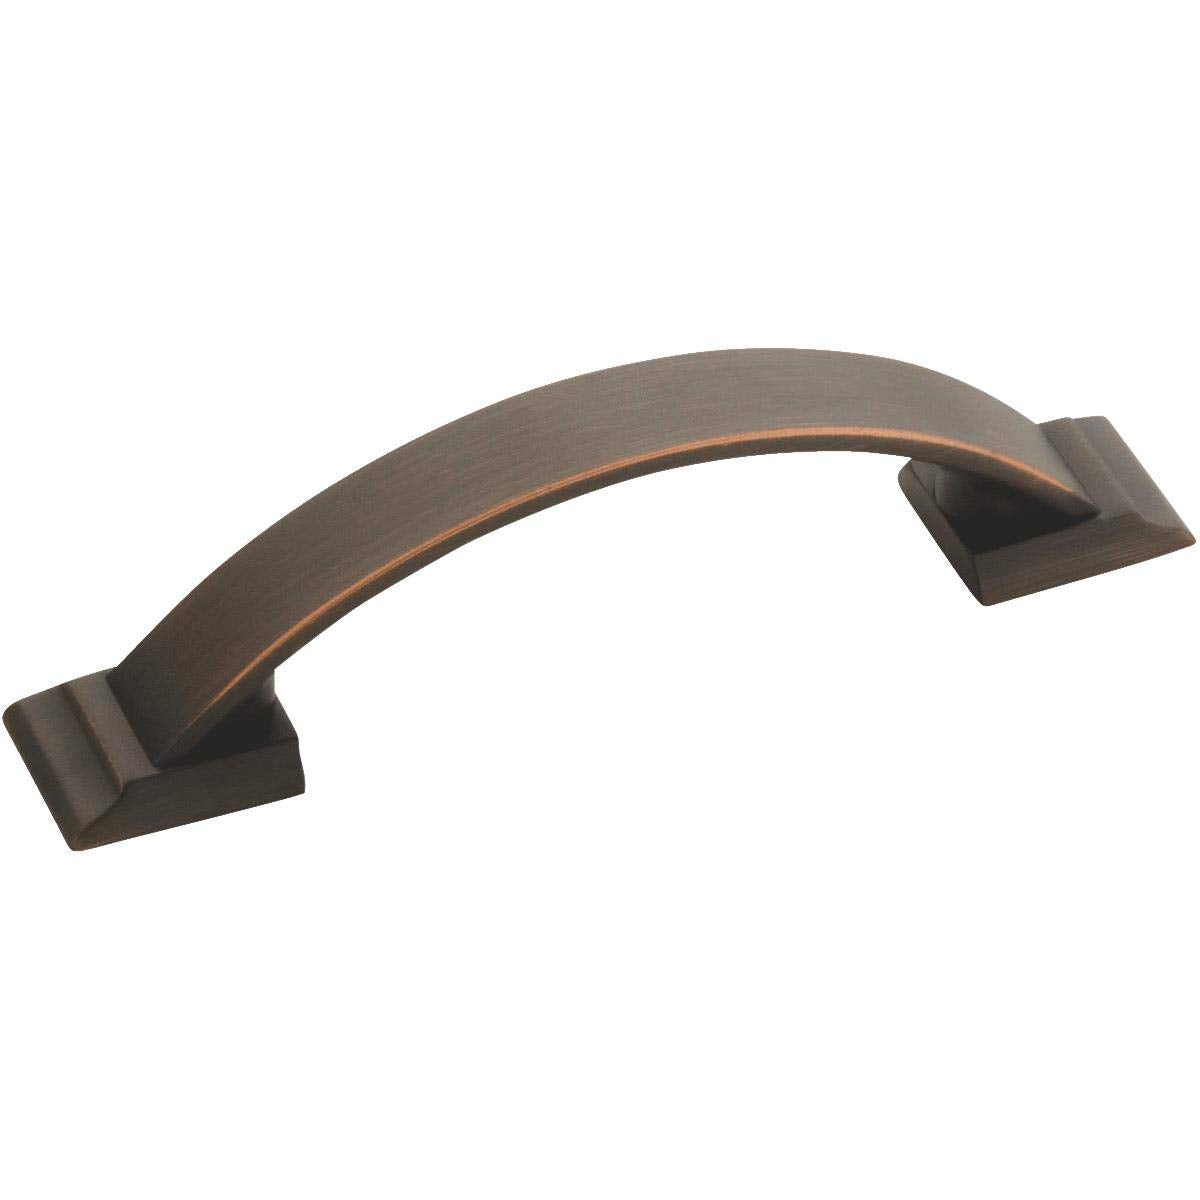 Amerock Candler Half Oval Arch Cabinet Pull 3 in. Oil Rubbed Bronze 5 pk